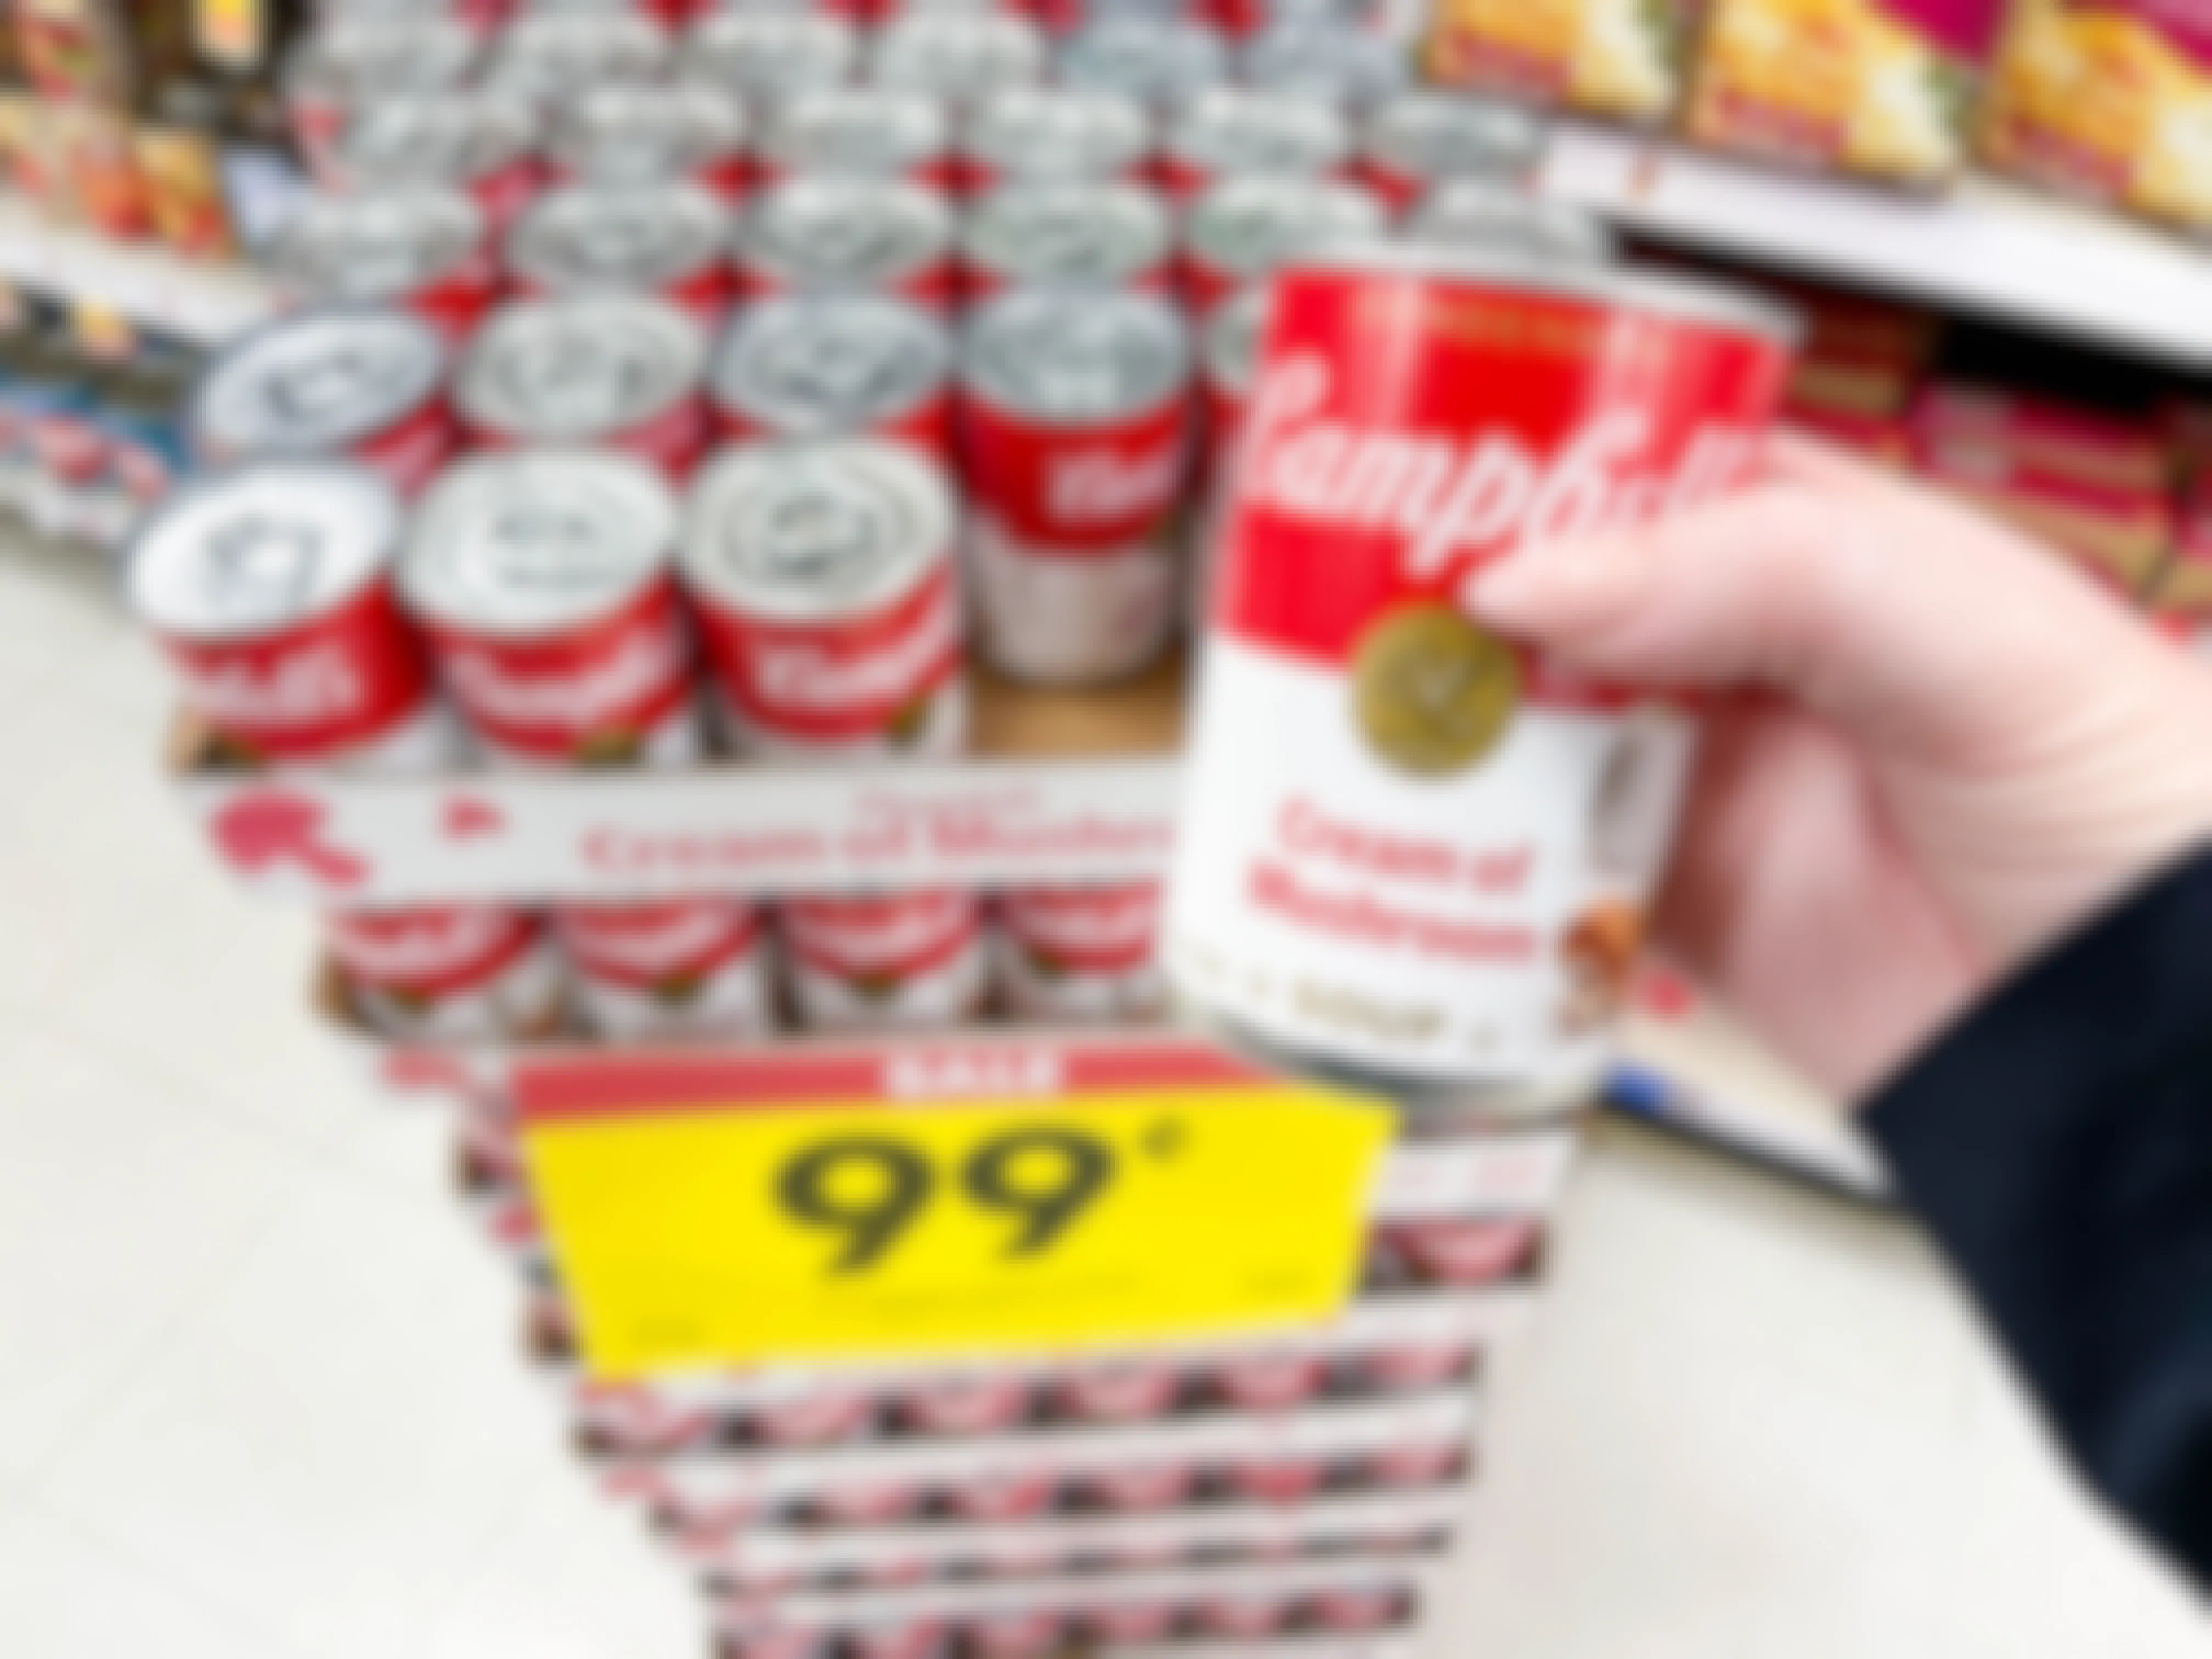 grabbing canned soup on sale